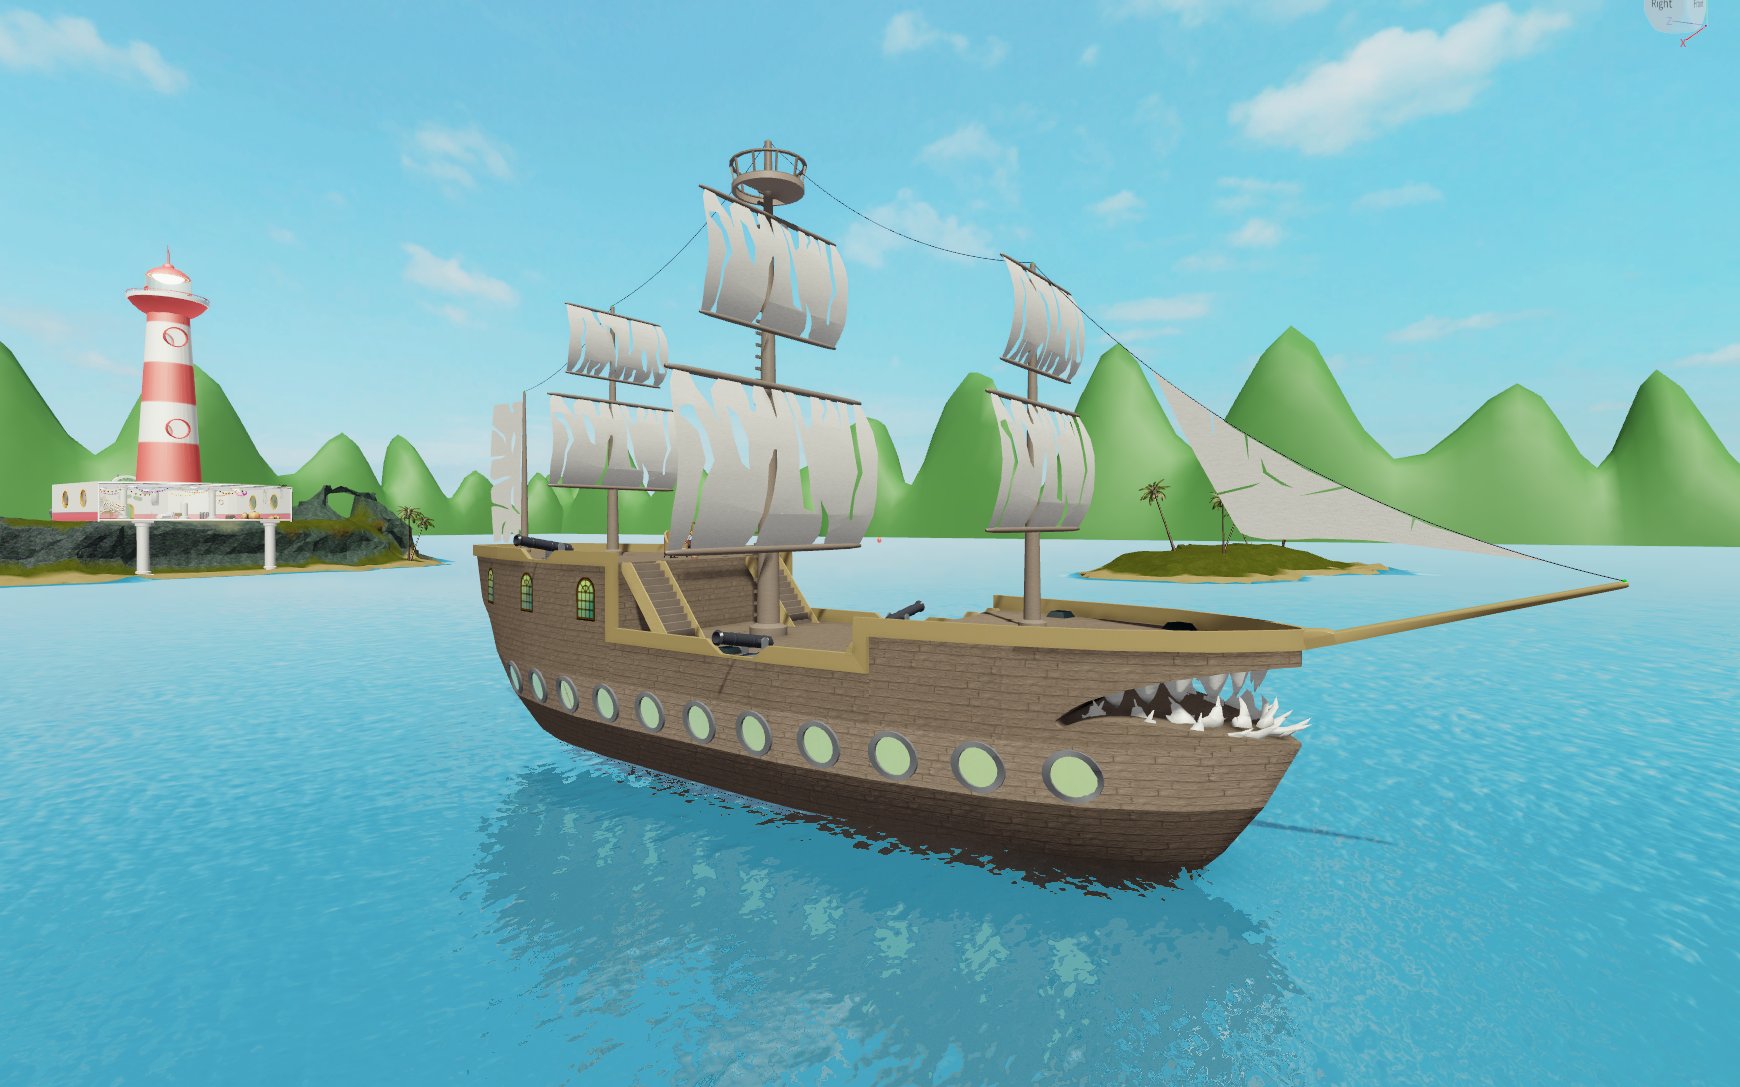 Simon On Twitter Arr You Ready For The Halloween Update The Flying Dutchman Soars Into Sharkbite Arriving In This Weekend S Update Https T Co Ljfli5ldi6 - i bought the new flying dutchman boat in roblox sharkbite youtube